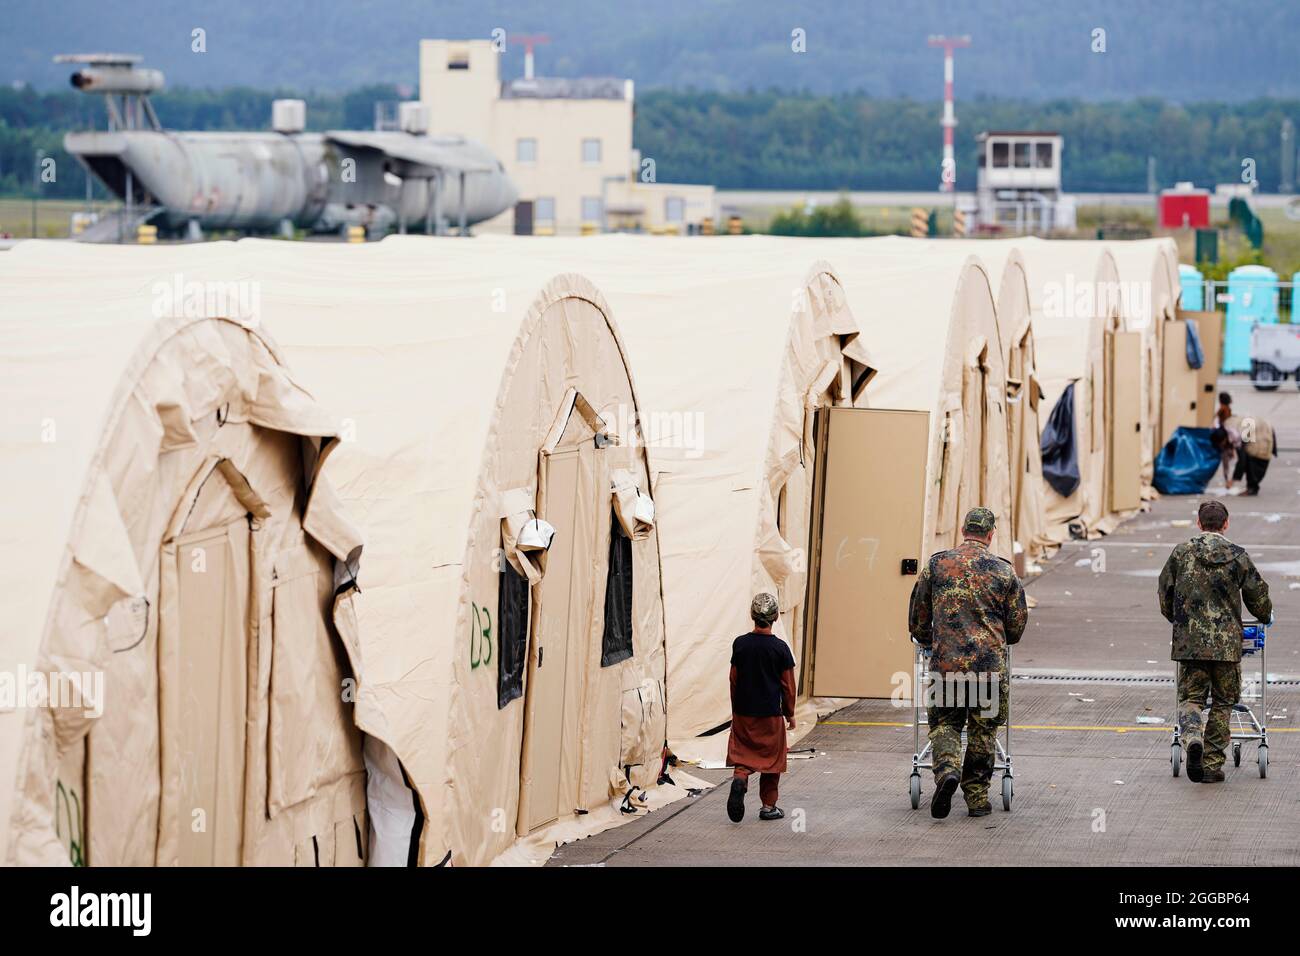 https://c8.alamy.com/comp/2GGBP64/ramstein-miesenbach-germany-30th-aug-2021-us-soldiers-walk-past-a-row-of-tents-with-shopping-carts-at-ramstein-air-base-the-us-also-uses-its-military-base-in-ramstein-palatinate-as-a-hub-for-the-evacuation-of-shelter-seekers-and-local-forces-from-afghanistan-credit-uwe-anspachdpaalamy-live-news-2GGBP64.jpg